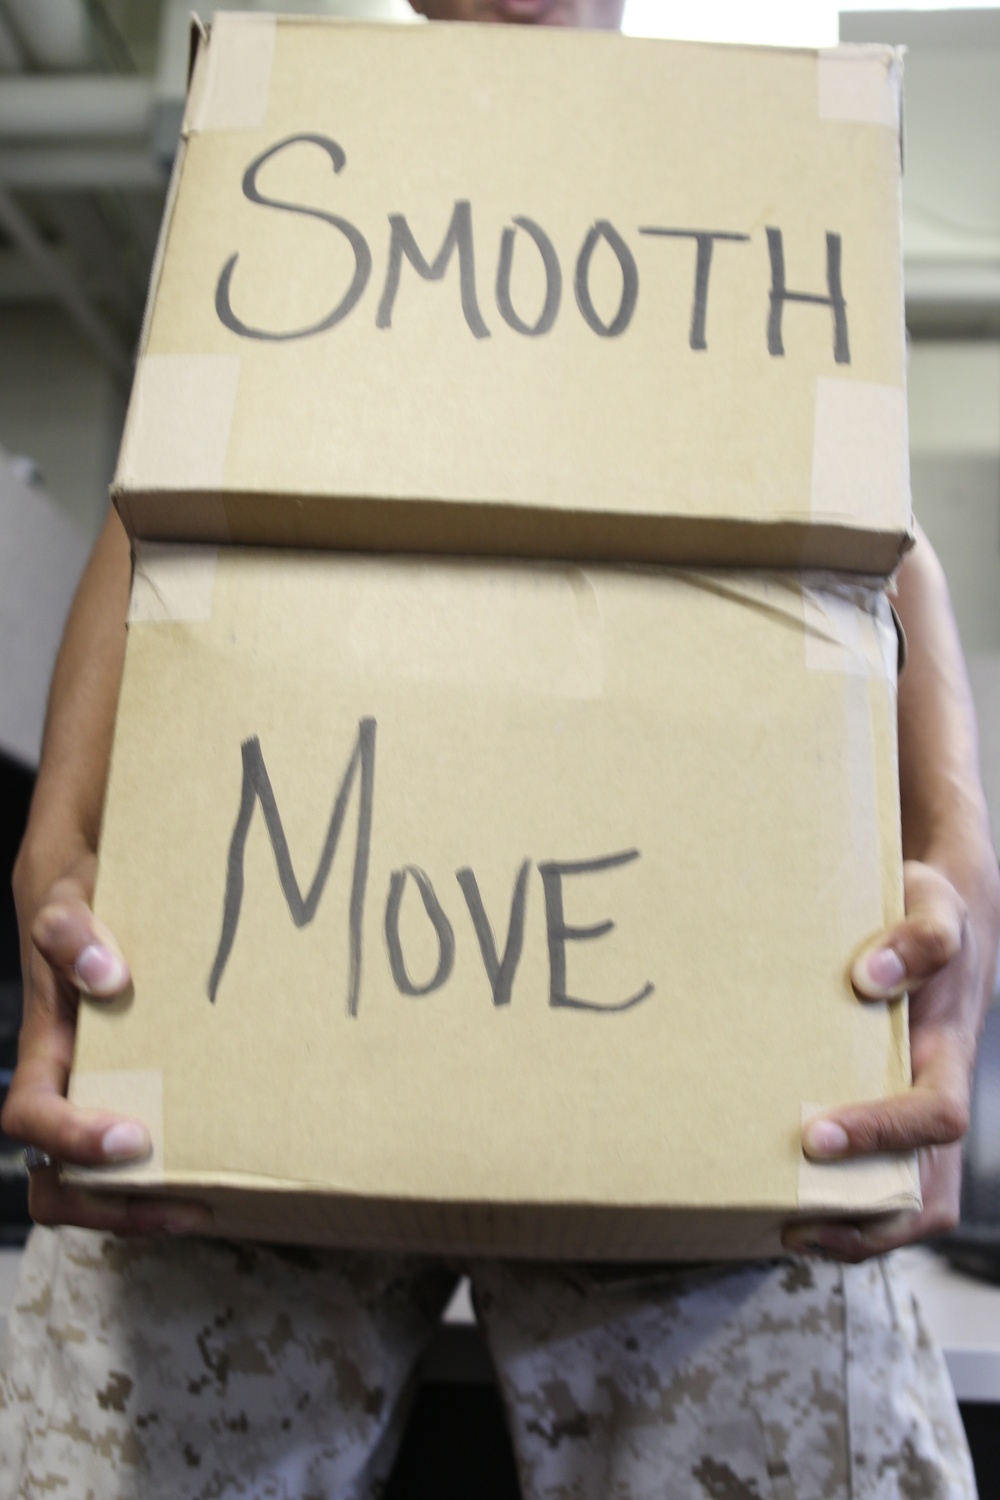 Smooth Move Workshop promotes seamless transition